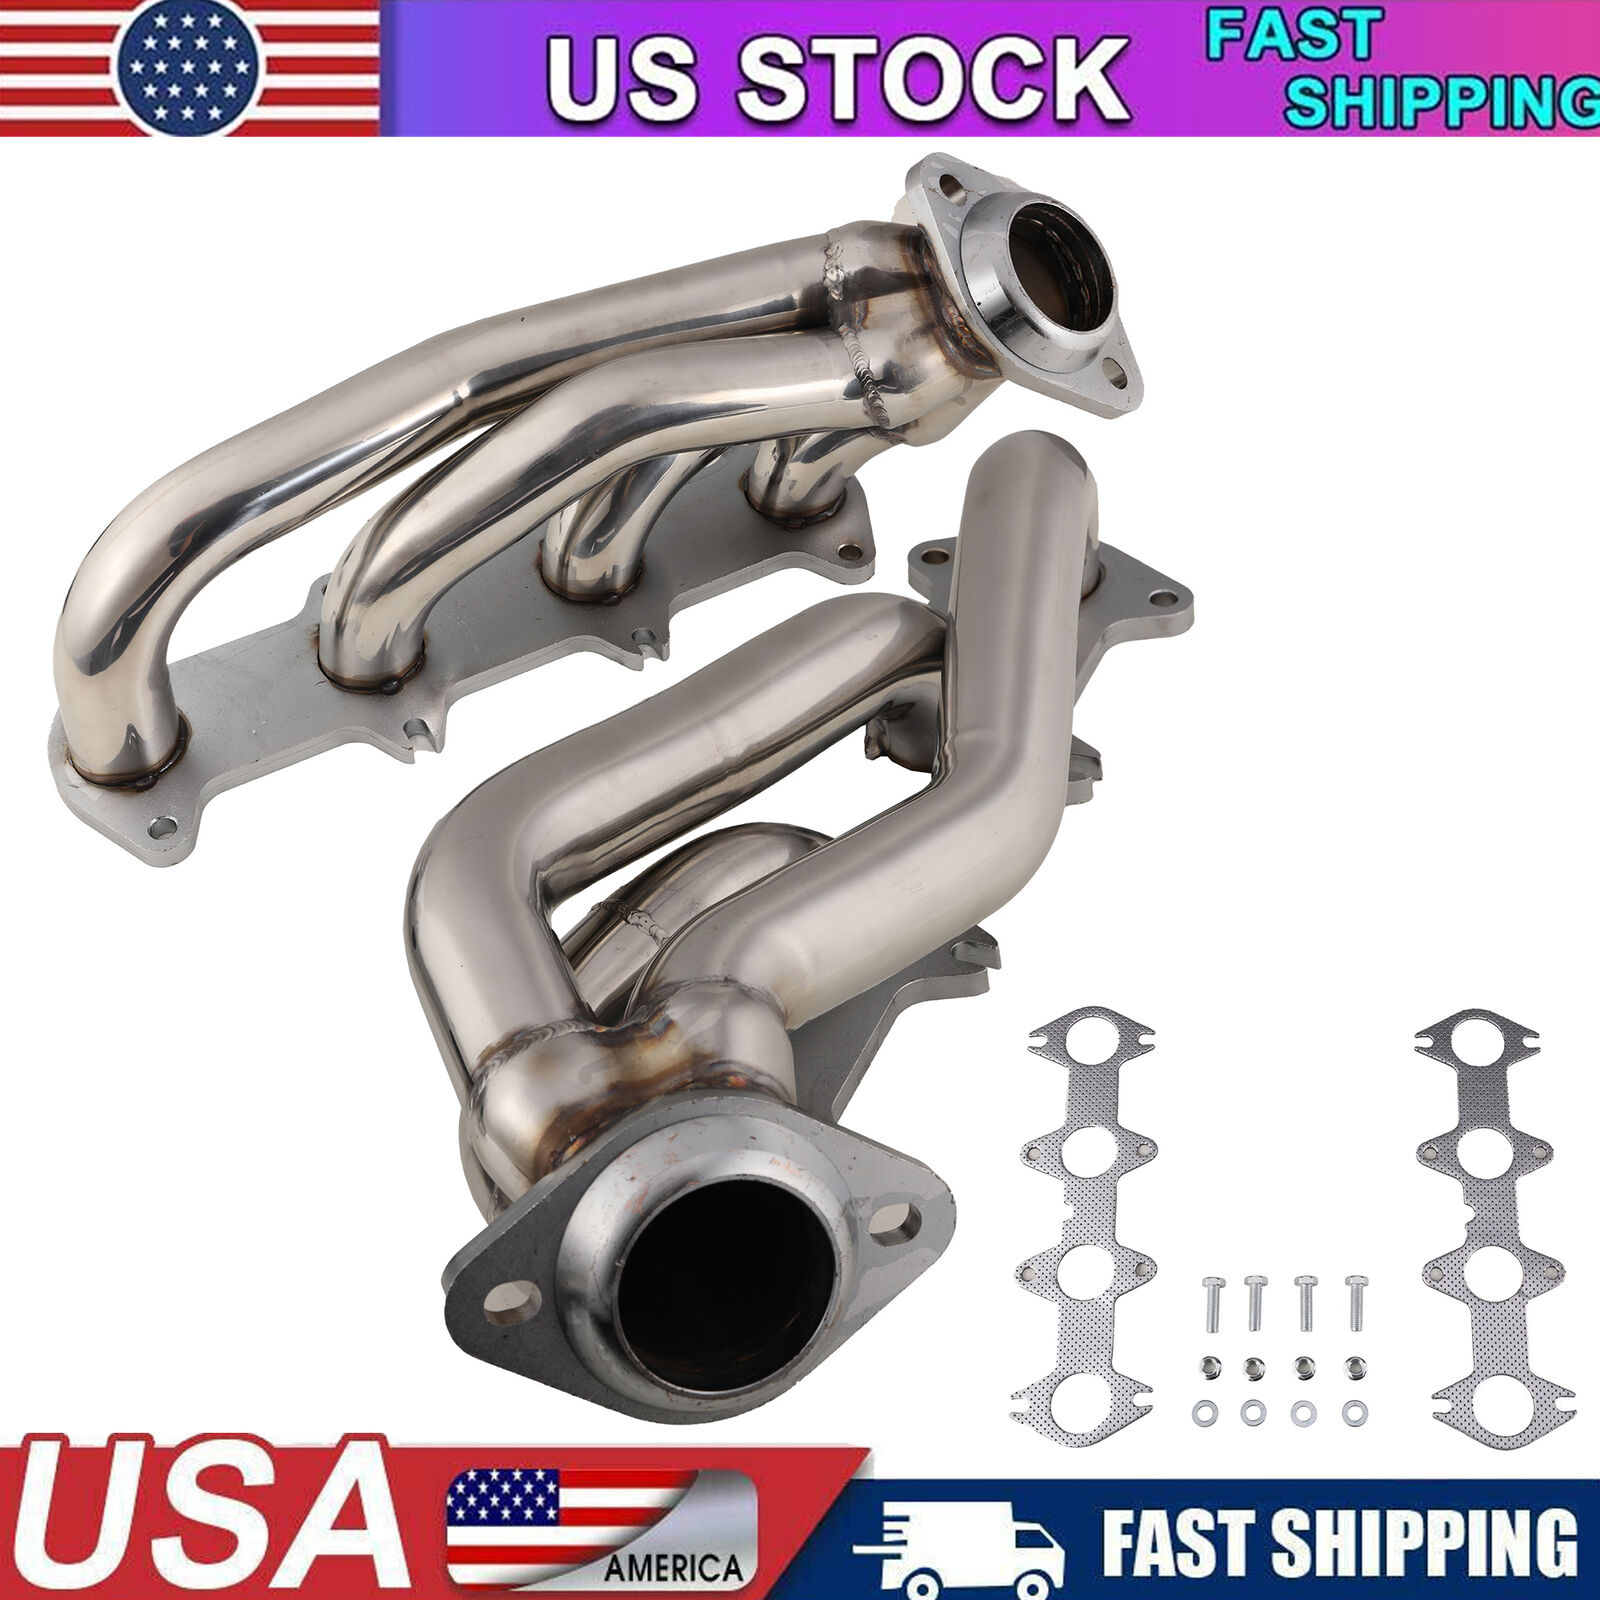 Stainless Steel Manifold Headers Fits Ford F150 F-150 Bronco 1987-1996 5.8L V8